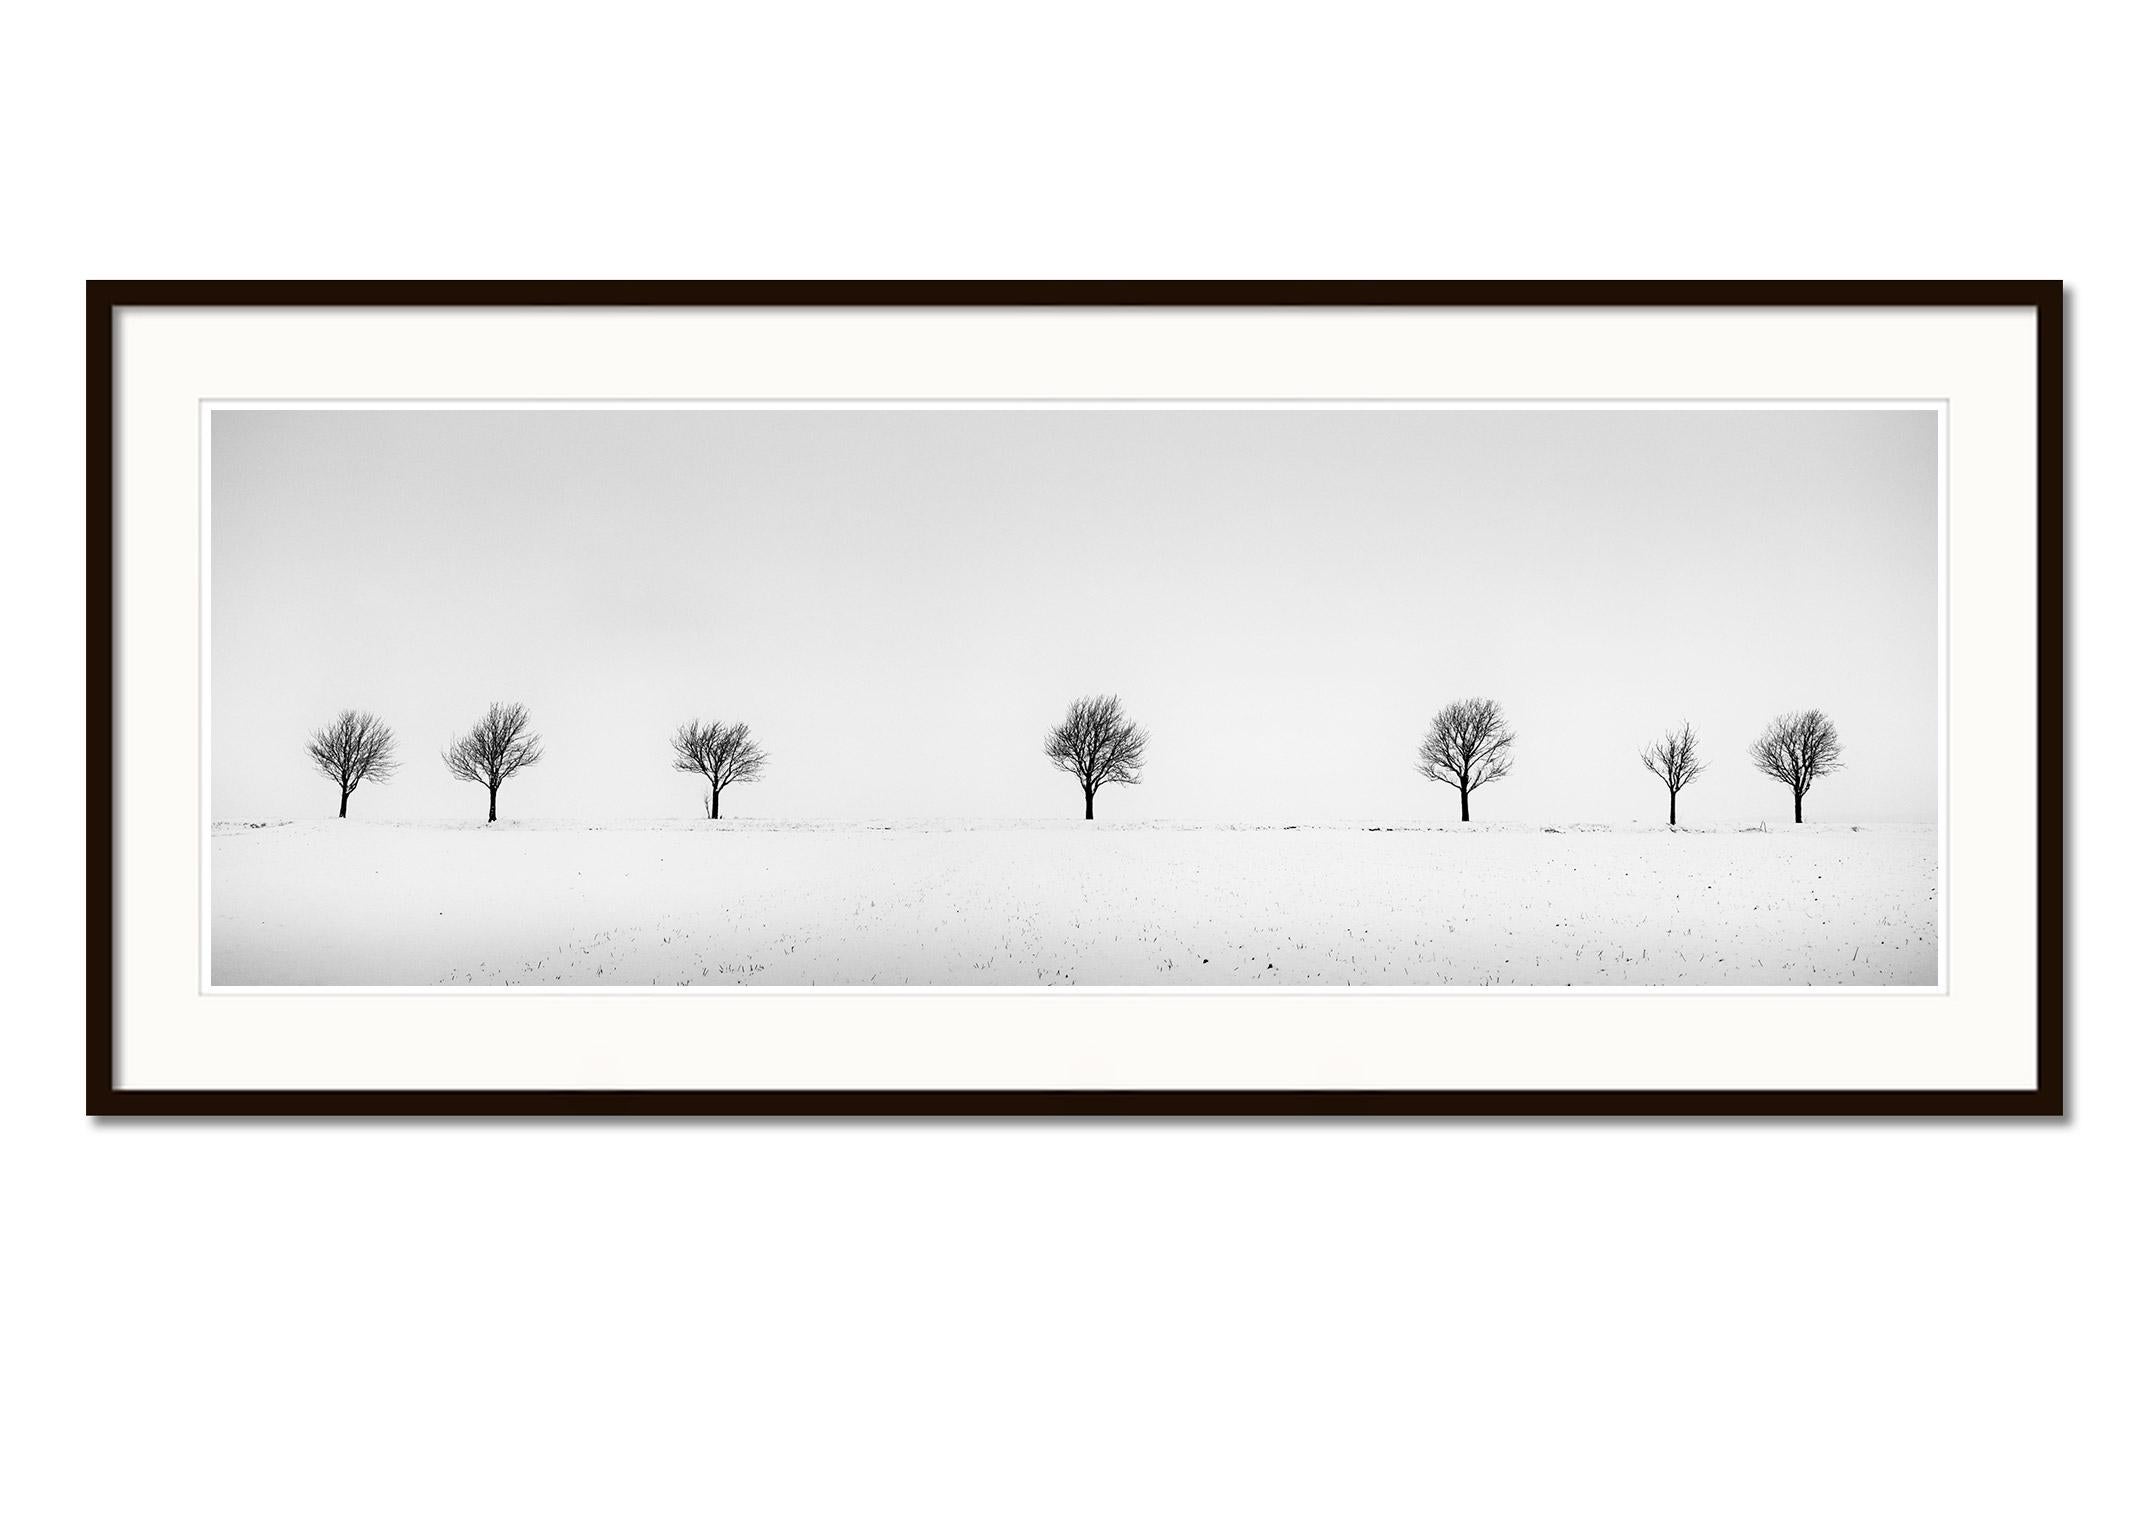 Cherry Trees in Snow Field, Panorama, black and white photography, landscape - Contemporary Photograph by Gerald Berghammer